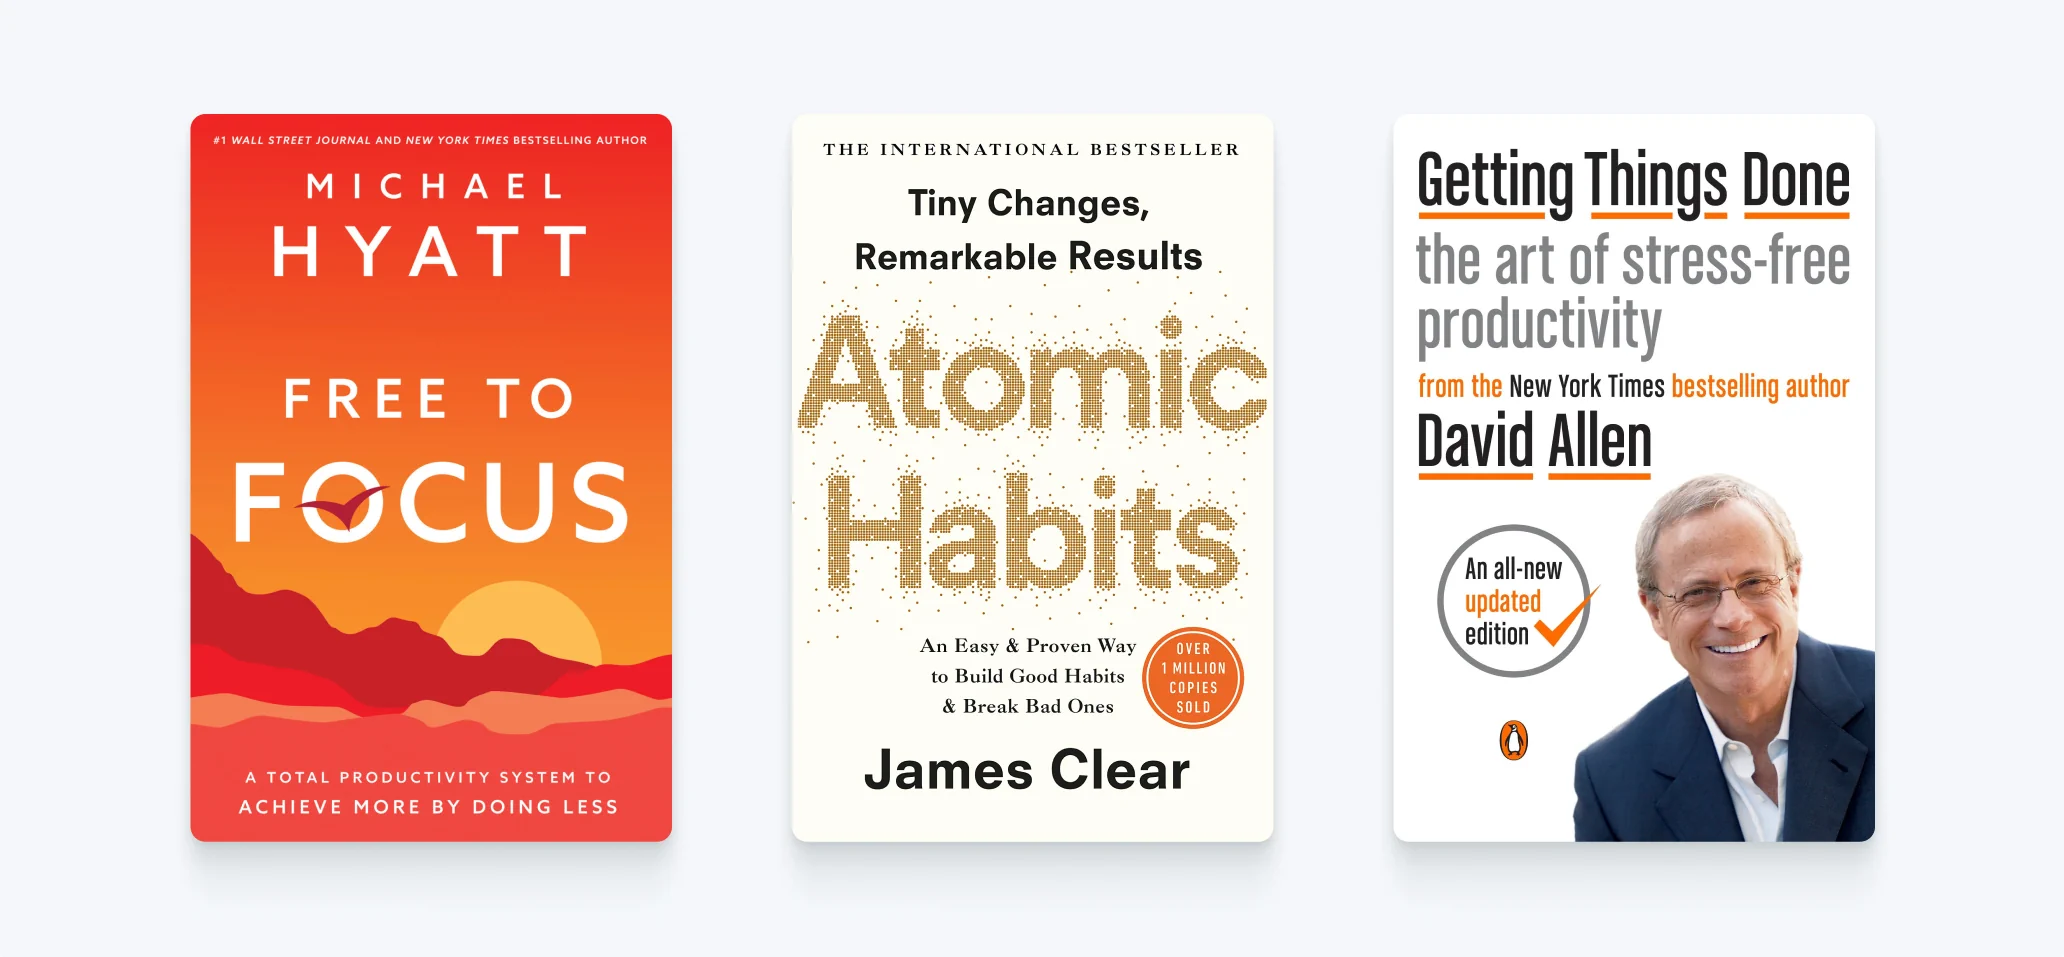 Three book covers side by side on a light gray background. All three books have titles that hint at focus and productivity.